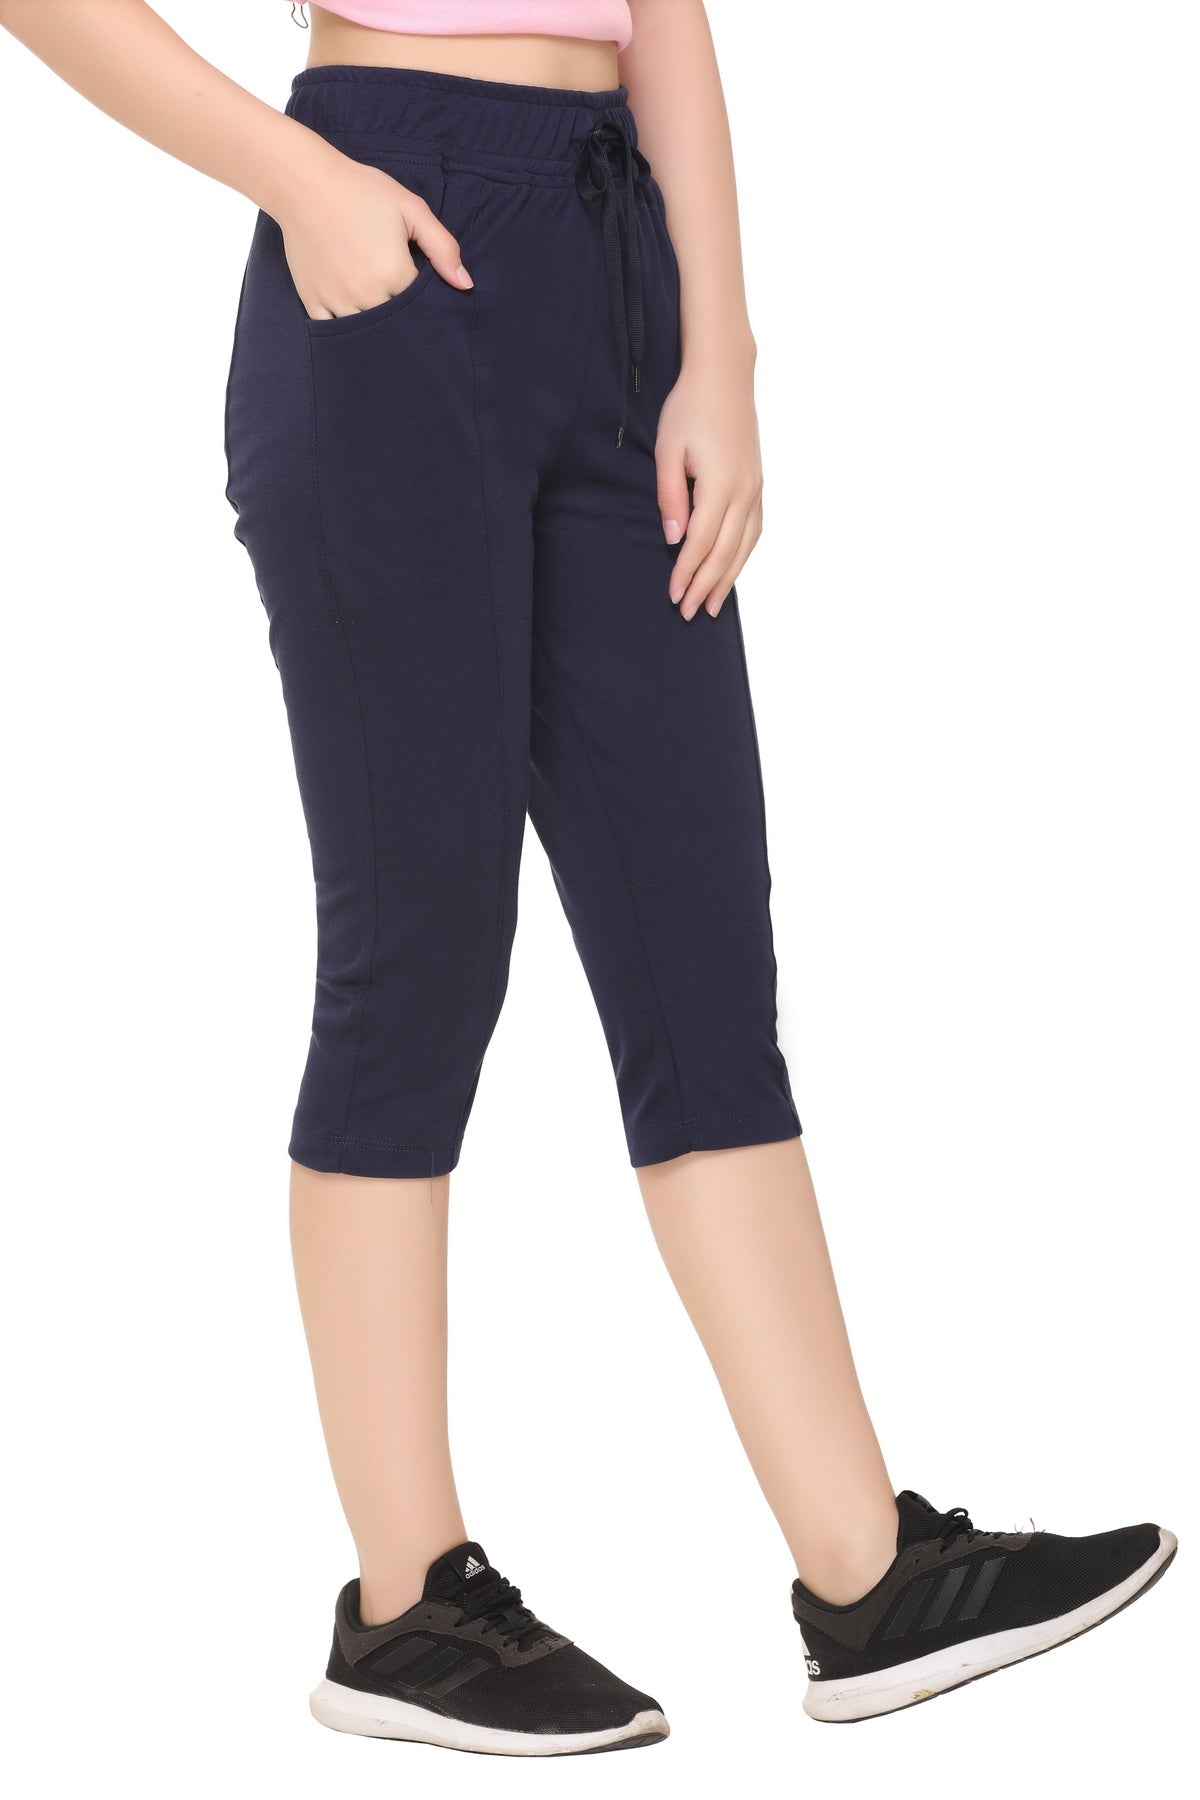 Cotton Capris For Women Capri Pants With Pockets Imperial Blue  Cupid  Clothings